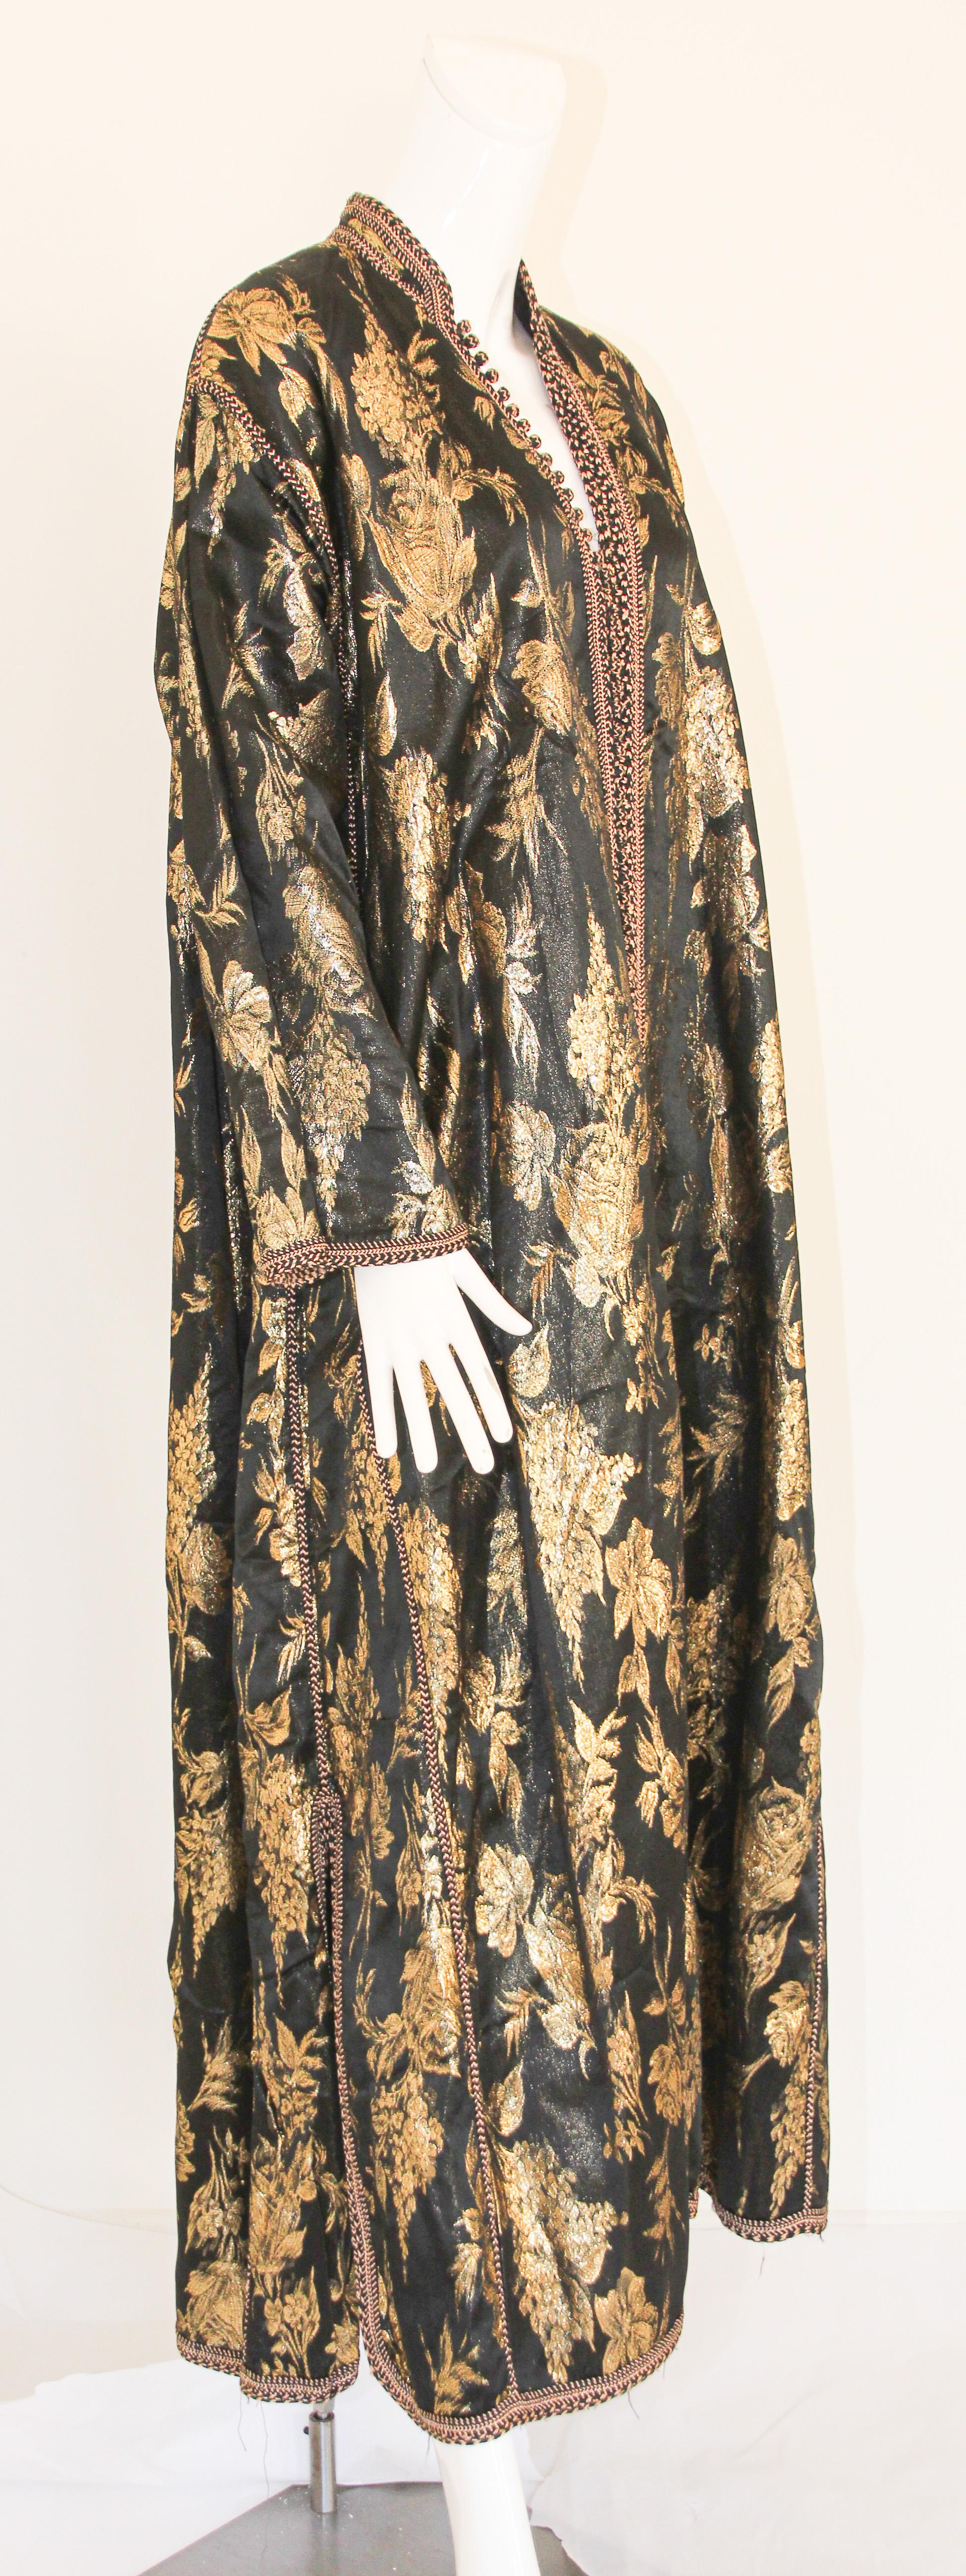 Vintage Moroccan Caftan, Black and Gold Embroidered, ca. 1960s For Sale 4